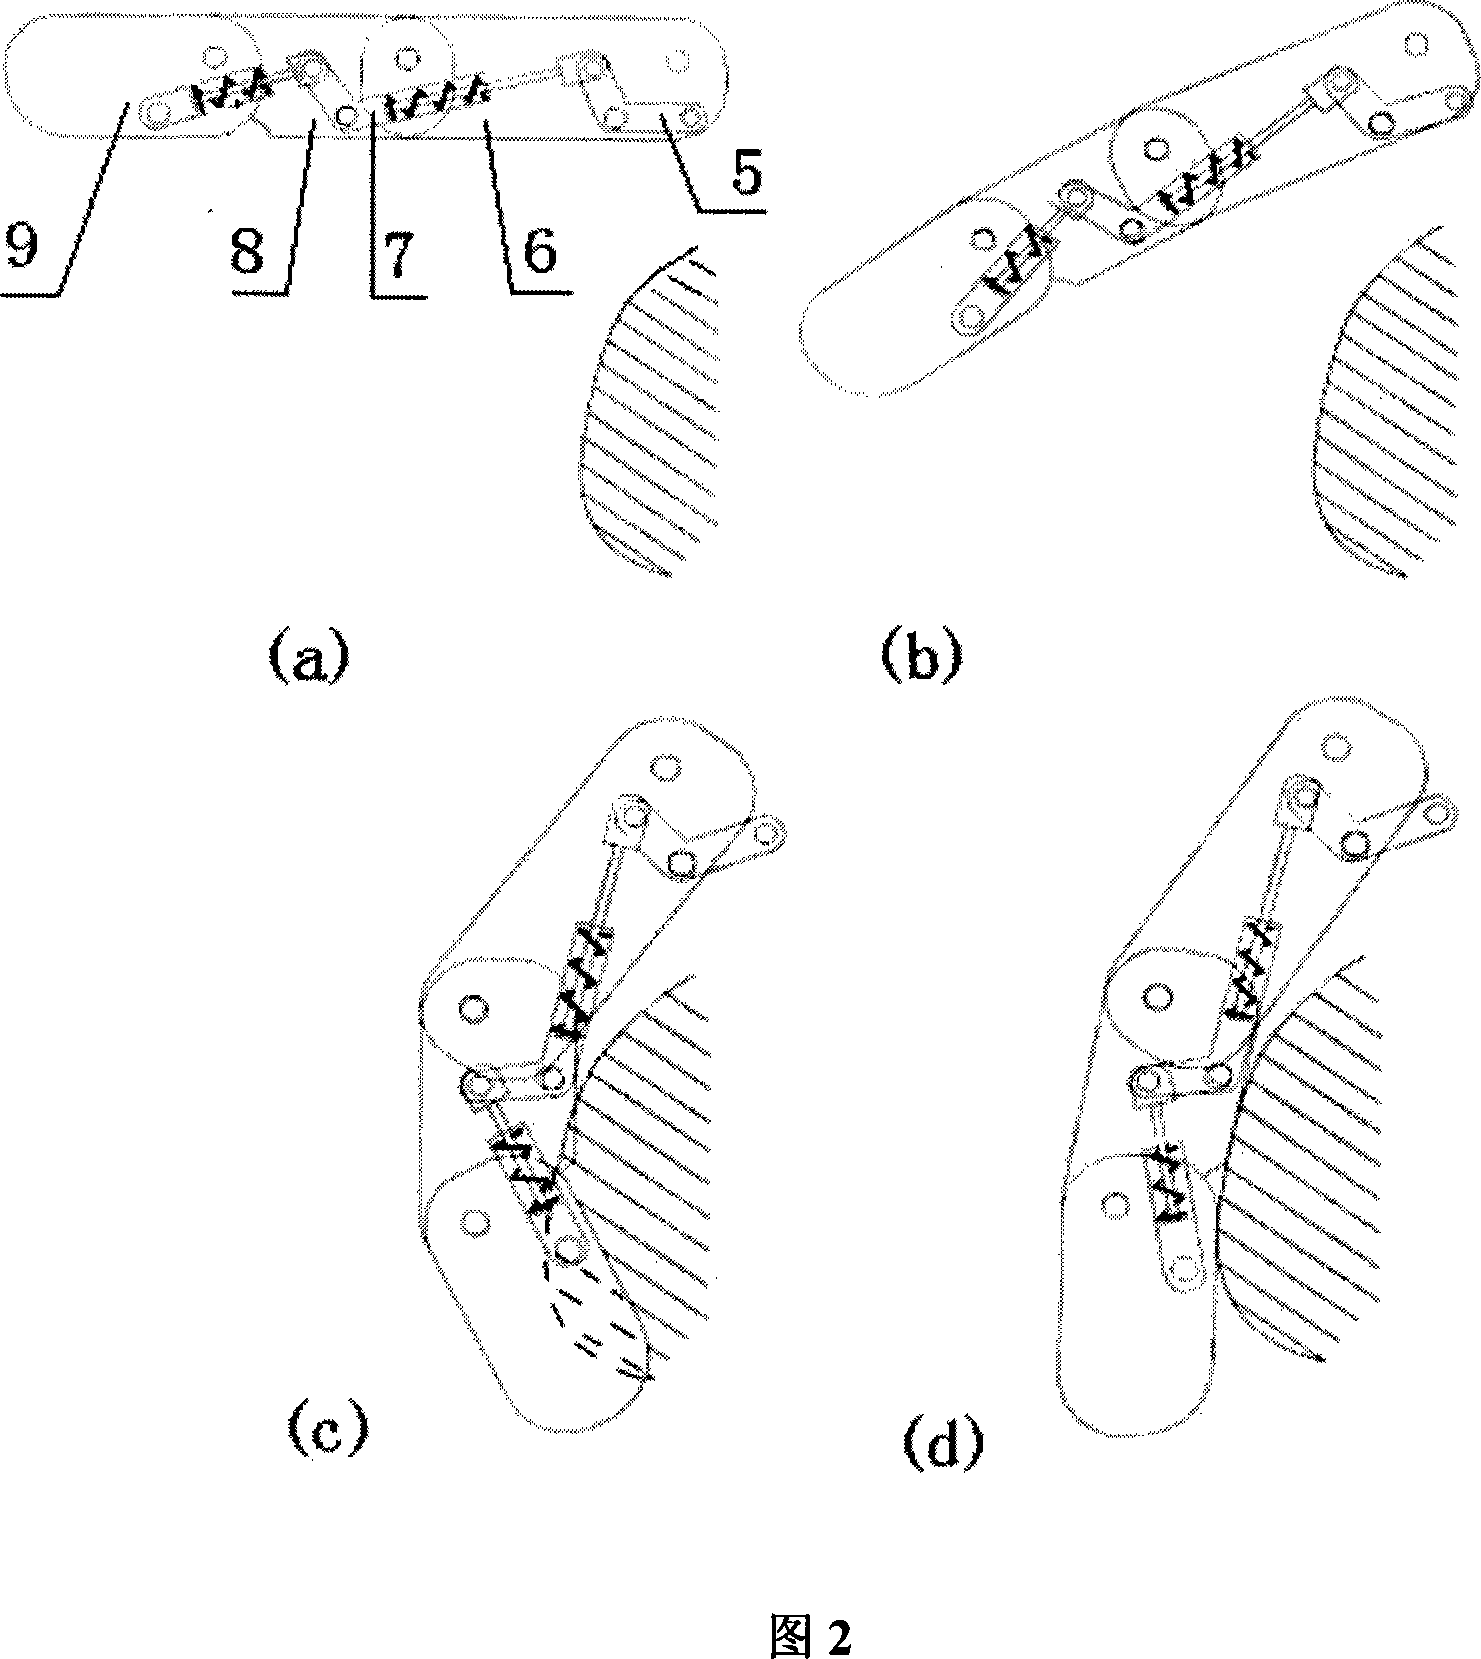 Simulative mechanical hand with under-driven adaptive mechanism